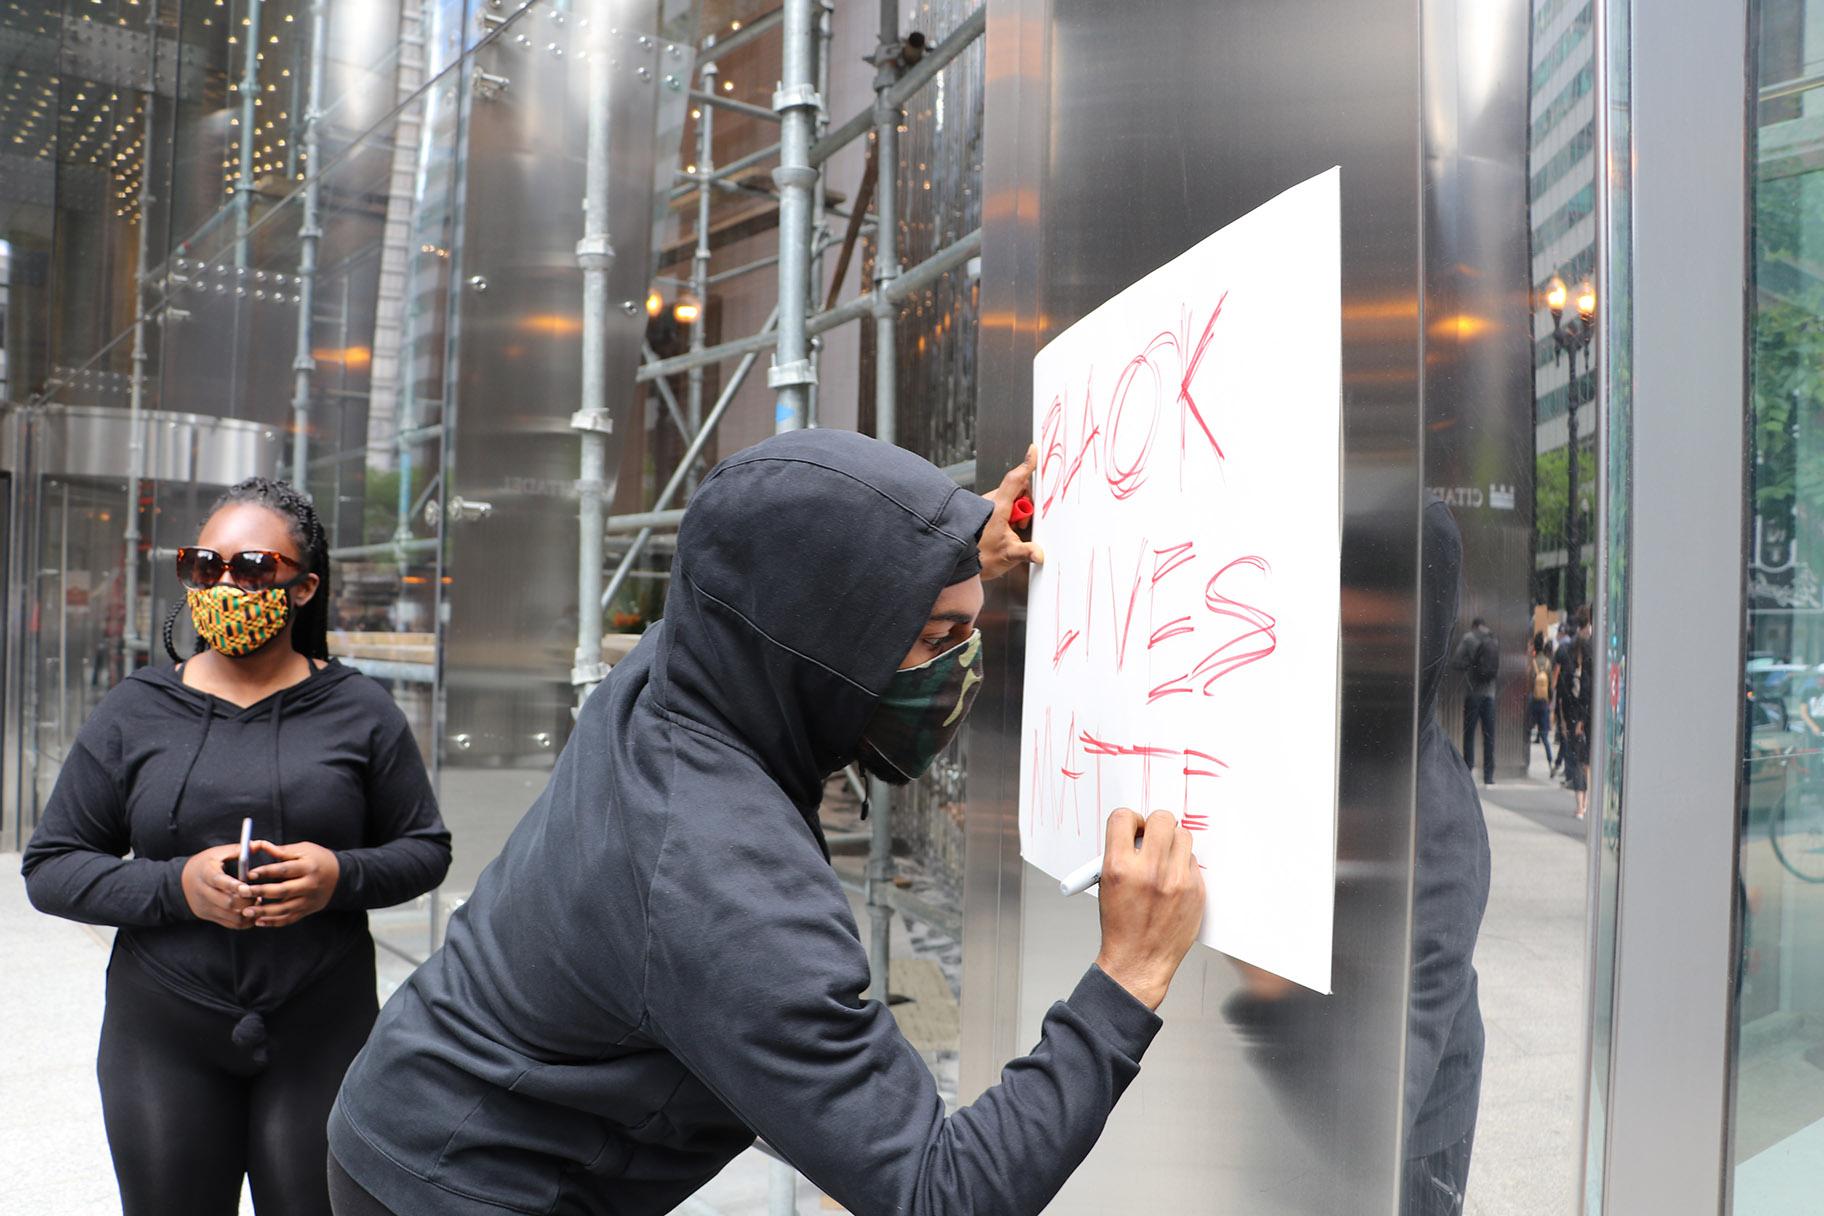 Khalladi Taylor, 23, of Edgewater, draws a Black Lives Matter sign during the protest. “I’m a black man and it affects me every time I see things like George Floyd,” Taylor said. “And it’s not just George Floyd, it’s a bunch of cases across not just this month or this year, that affect me personally. And I feel like it happens here in this city as well, so that’s why I need to be out here with my people.” (Evan Garcia / WTTW News)